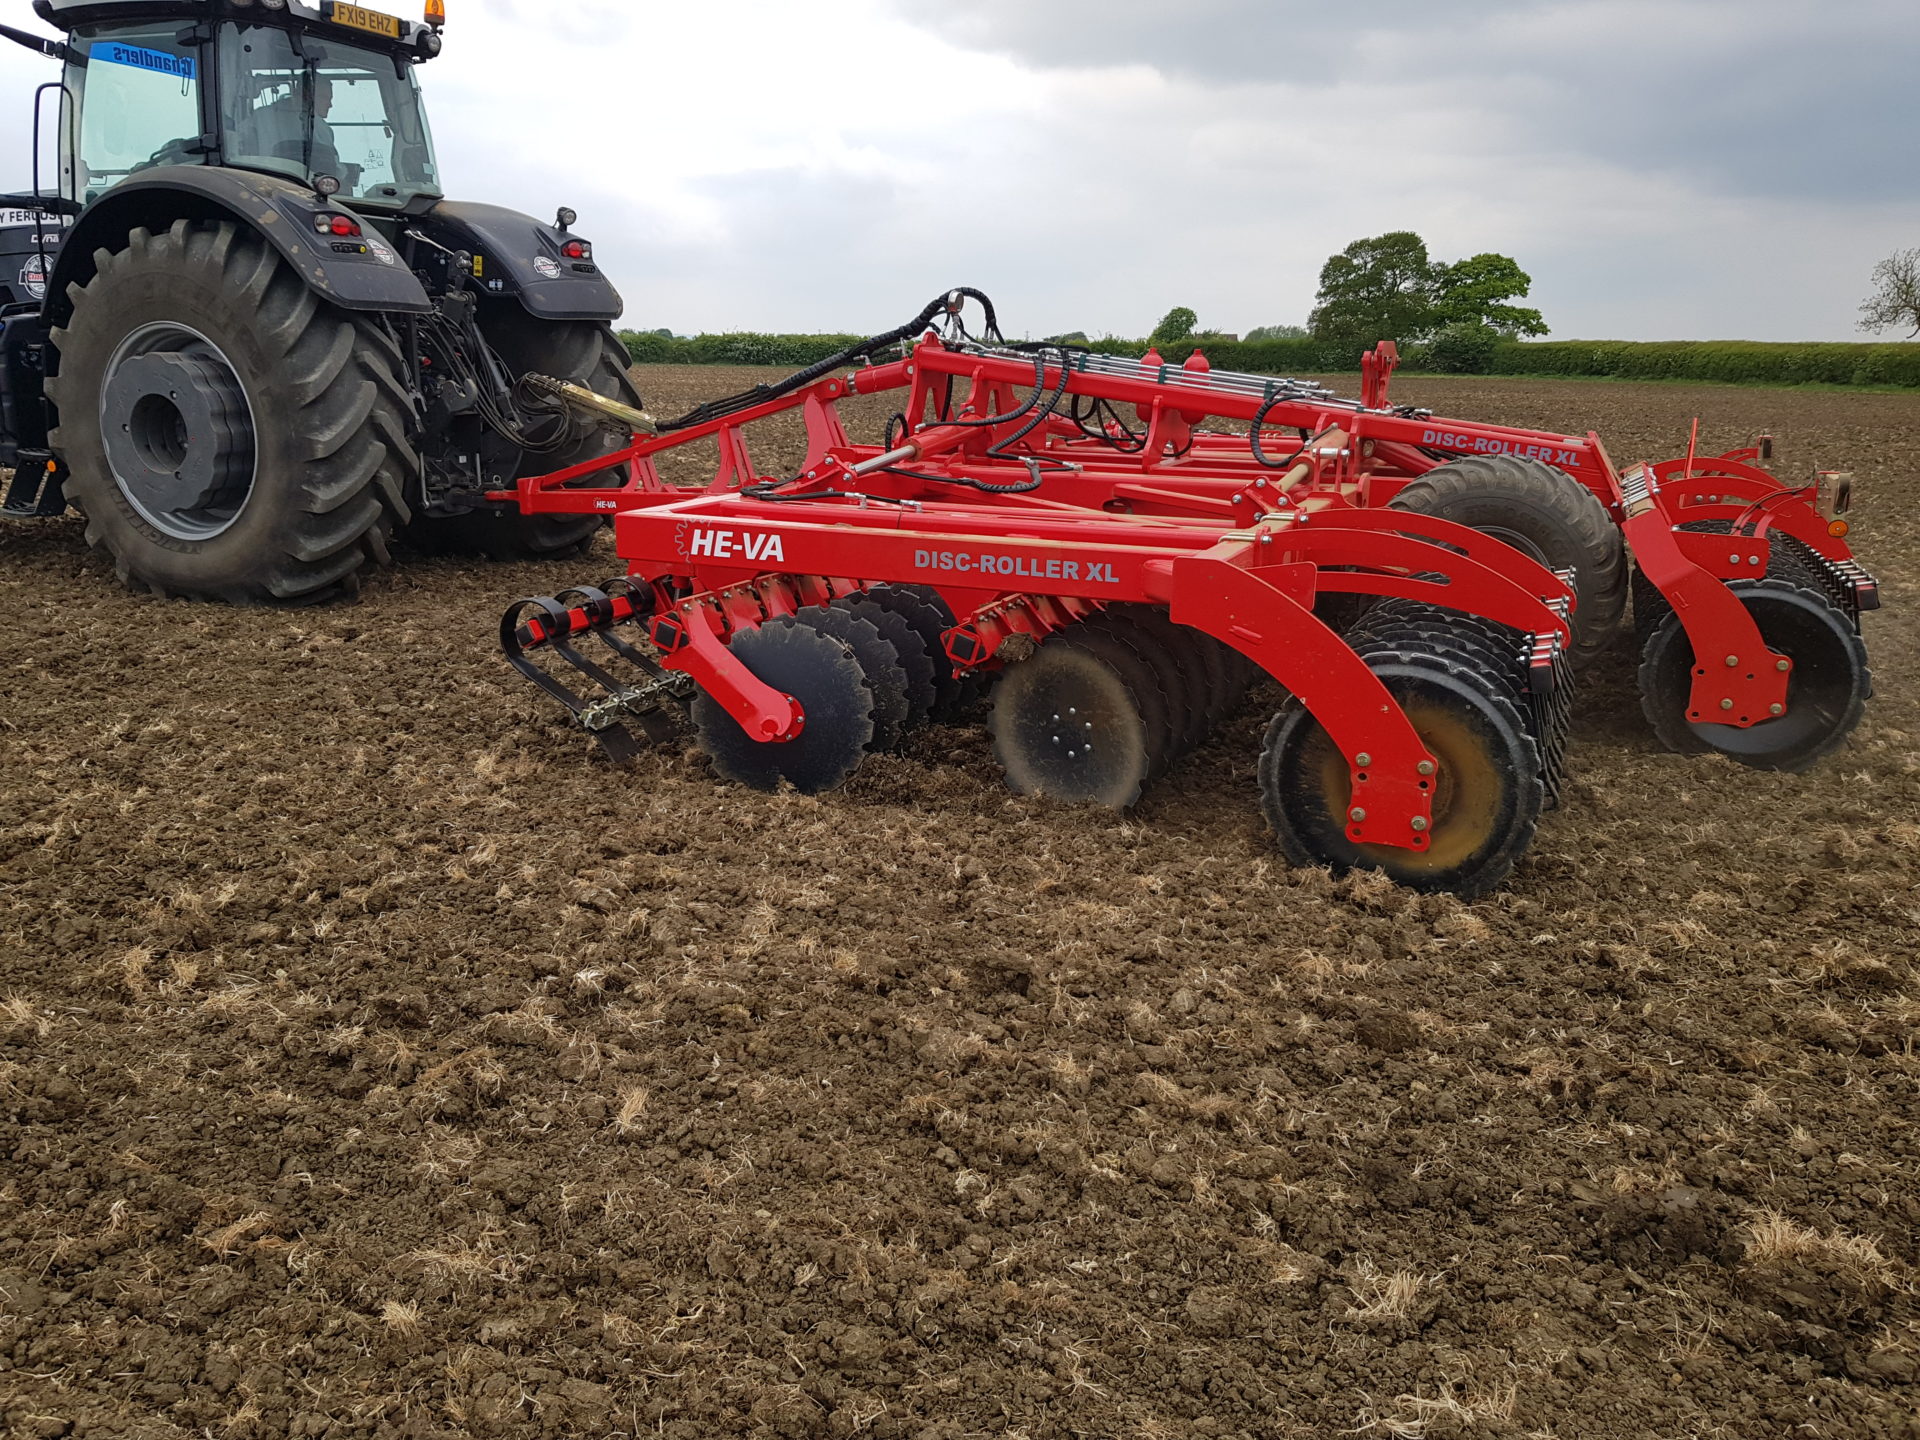 OPICO to launch HE-VA’s Disc Roller Contour XL at Cereals 2021